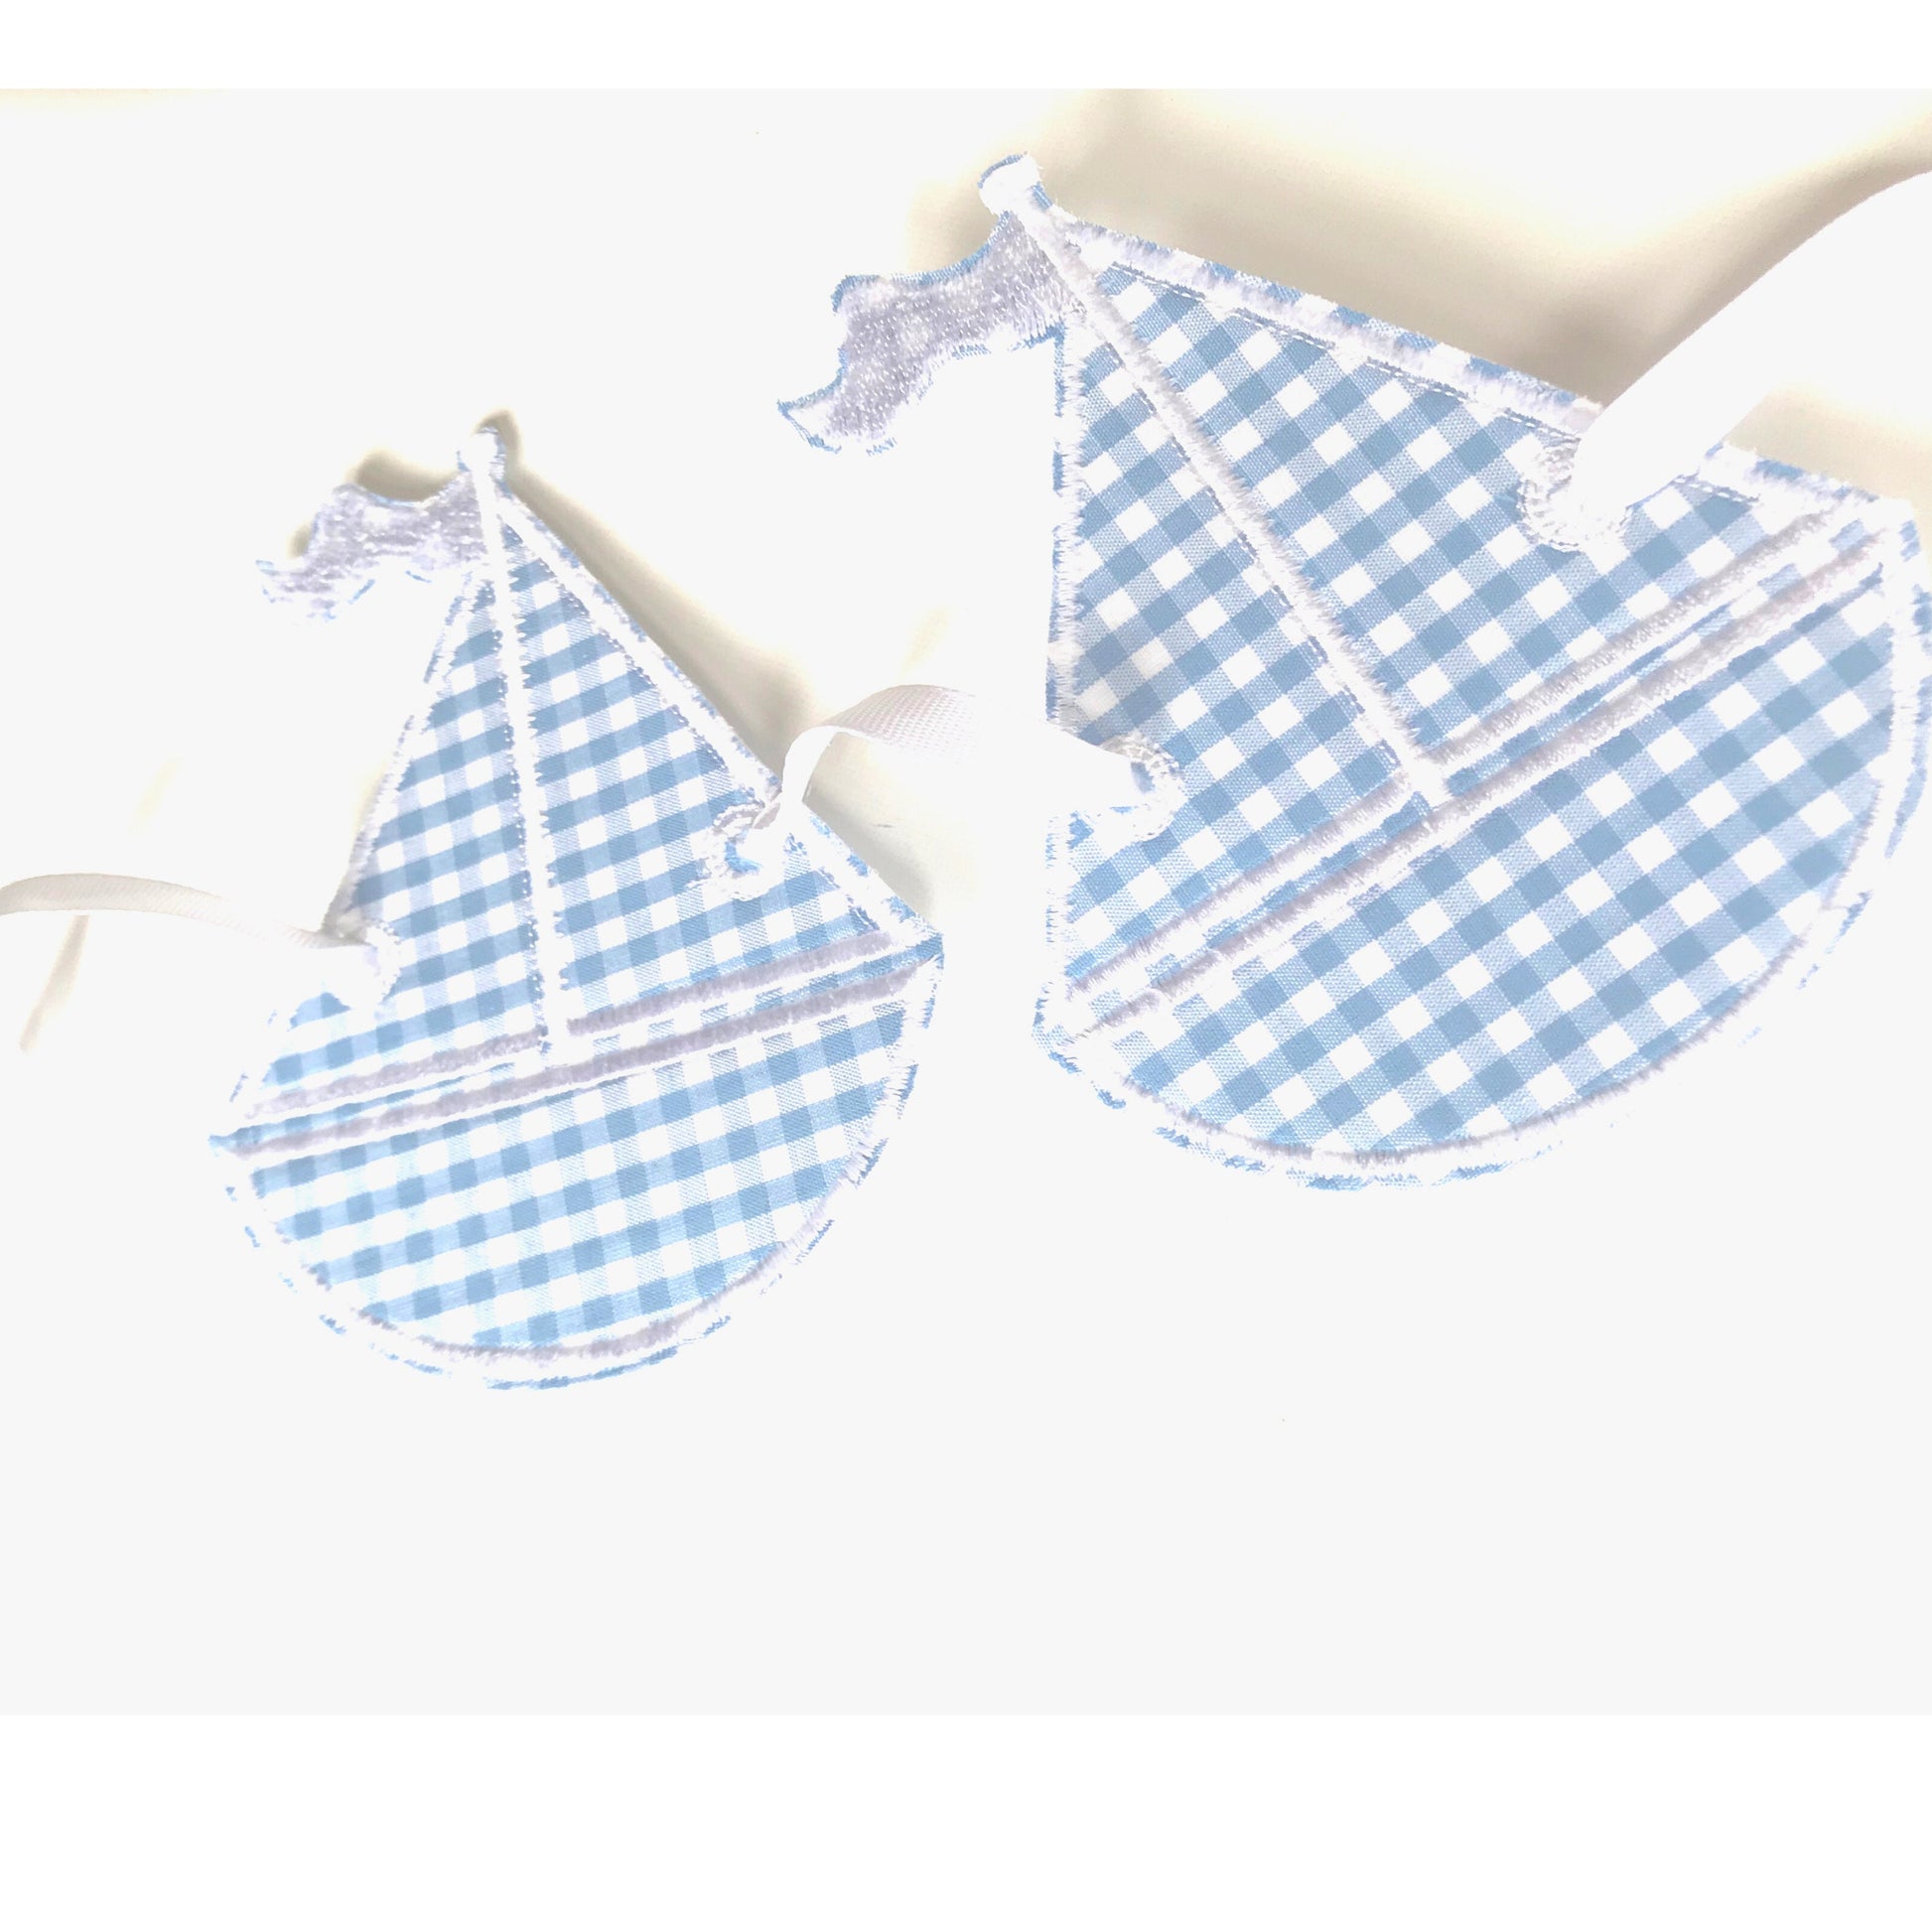 Preppy Sailboat Milestone Bunting l Baby 12 Month Milestone Photo Holder l Nursery Nautical Picture Clips l Baby's 1st Birthday Photo Clips